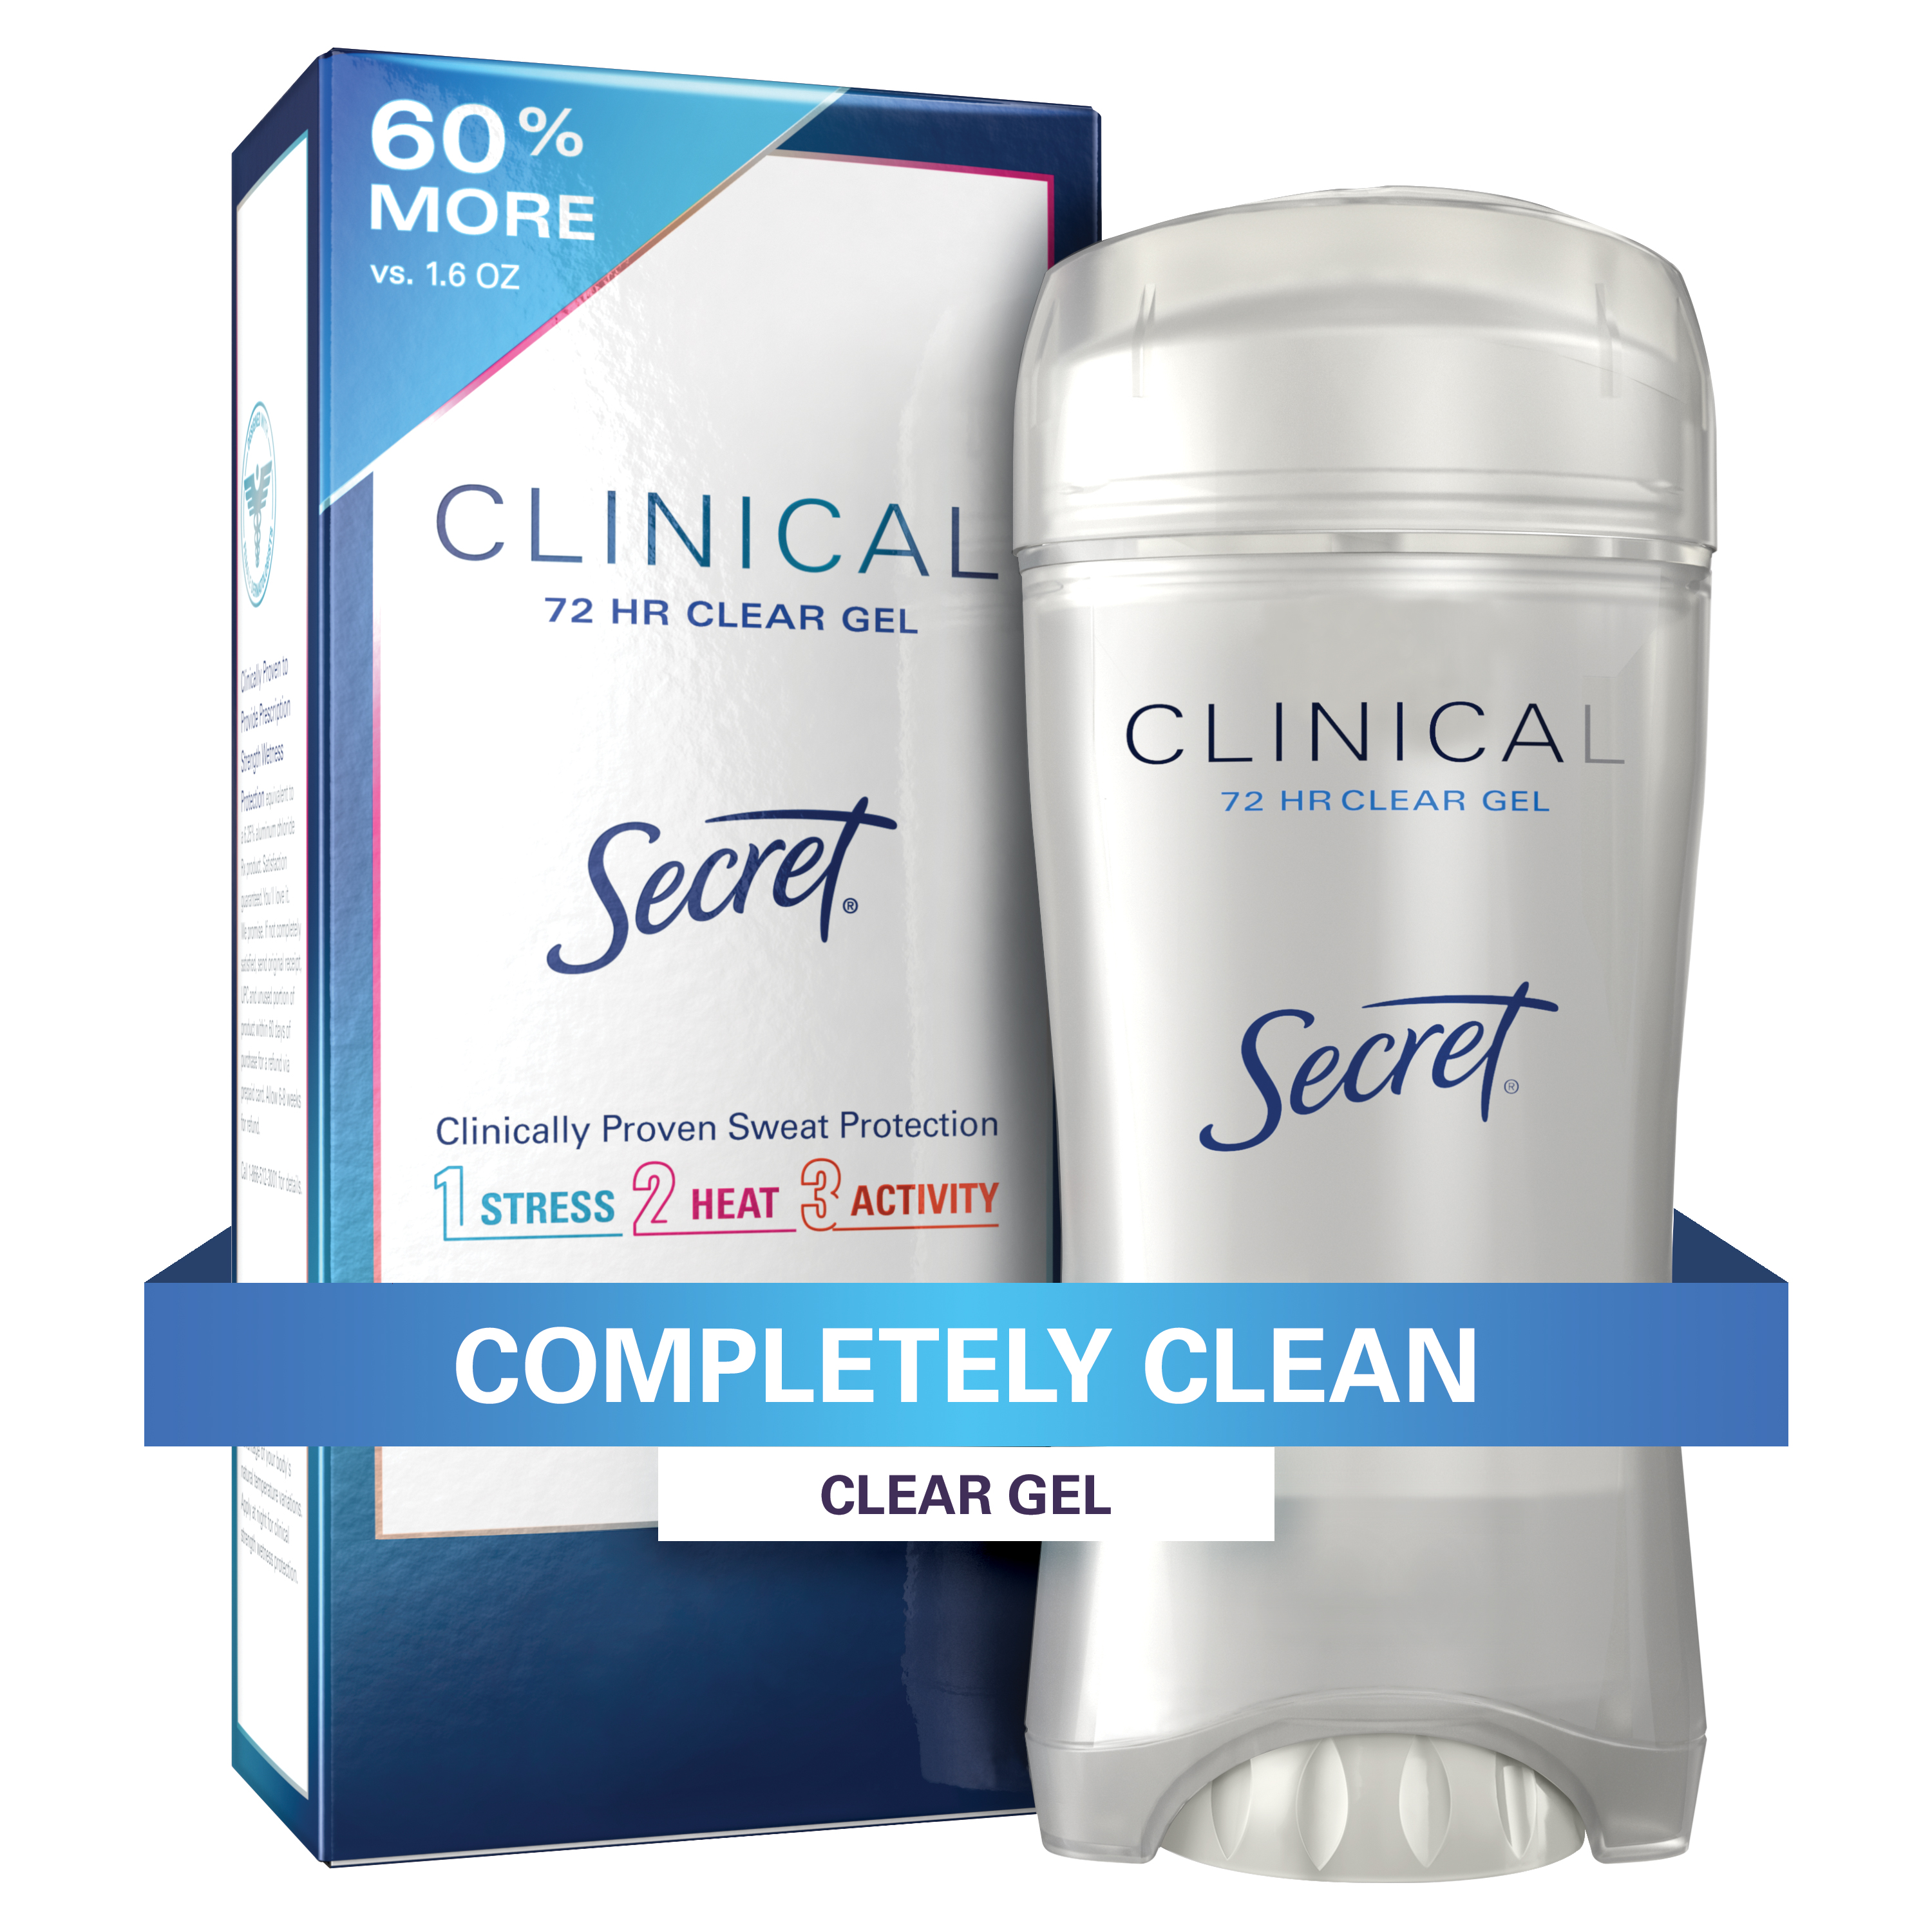 Secret Clinical Strength Clear Gel Antiperspirant and Deodorant, Completely Clean, 2.6 oz - image 1 of 6